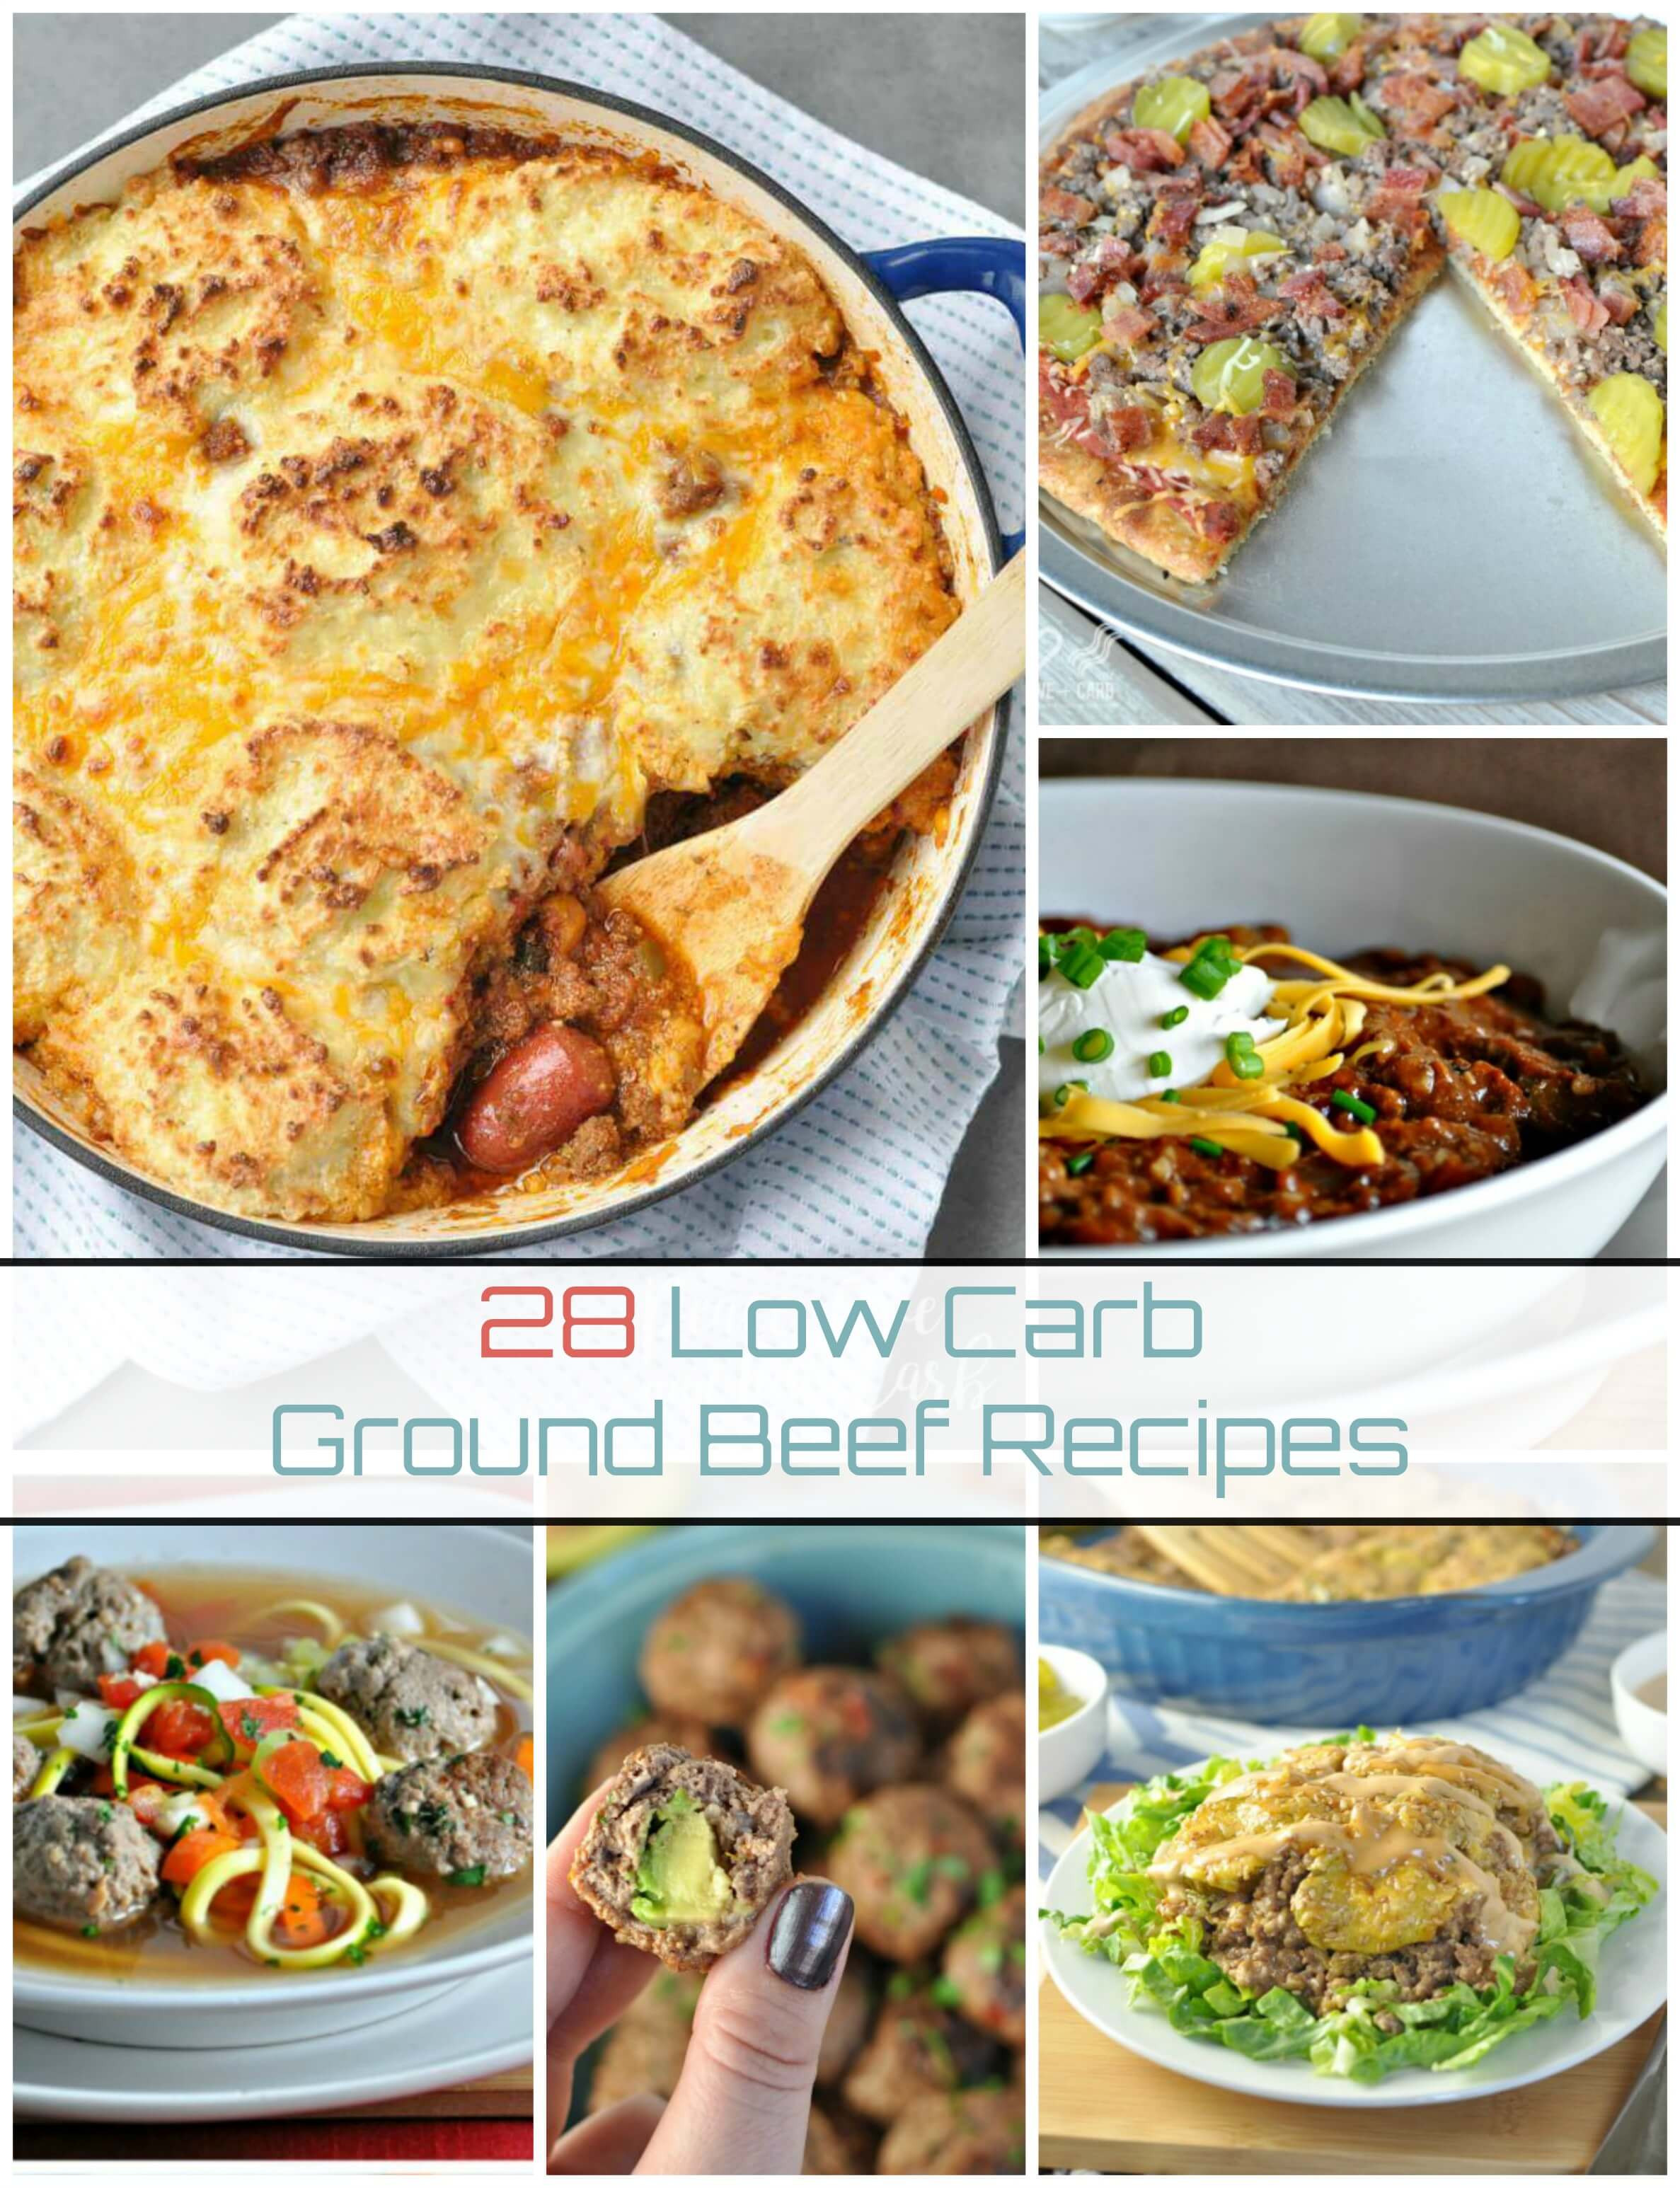 Low Carb Meals With Ground Beef
 28 Low Carb Ground Beef Recipes